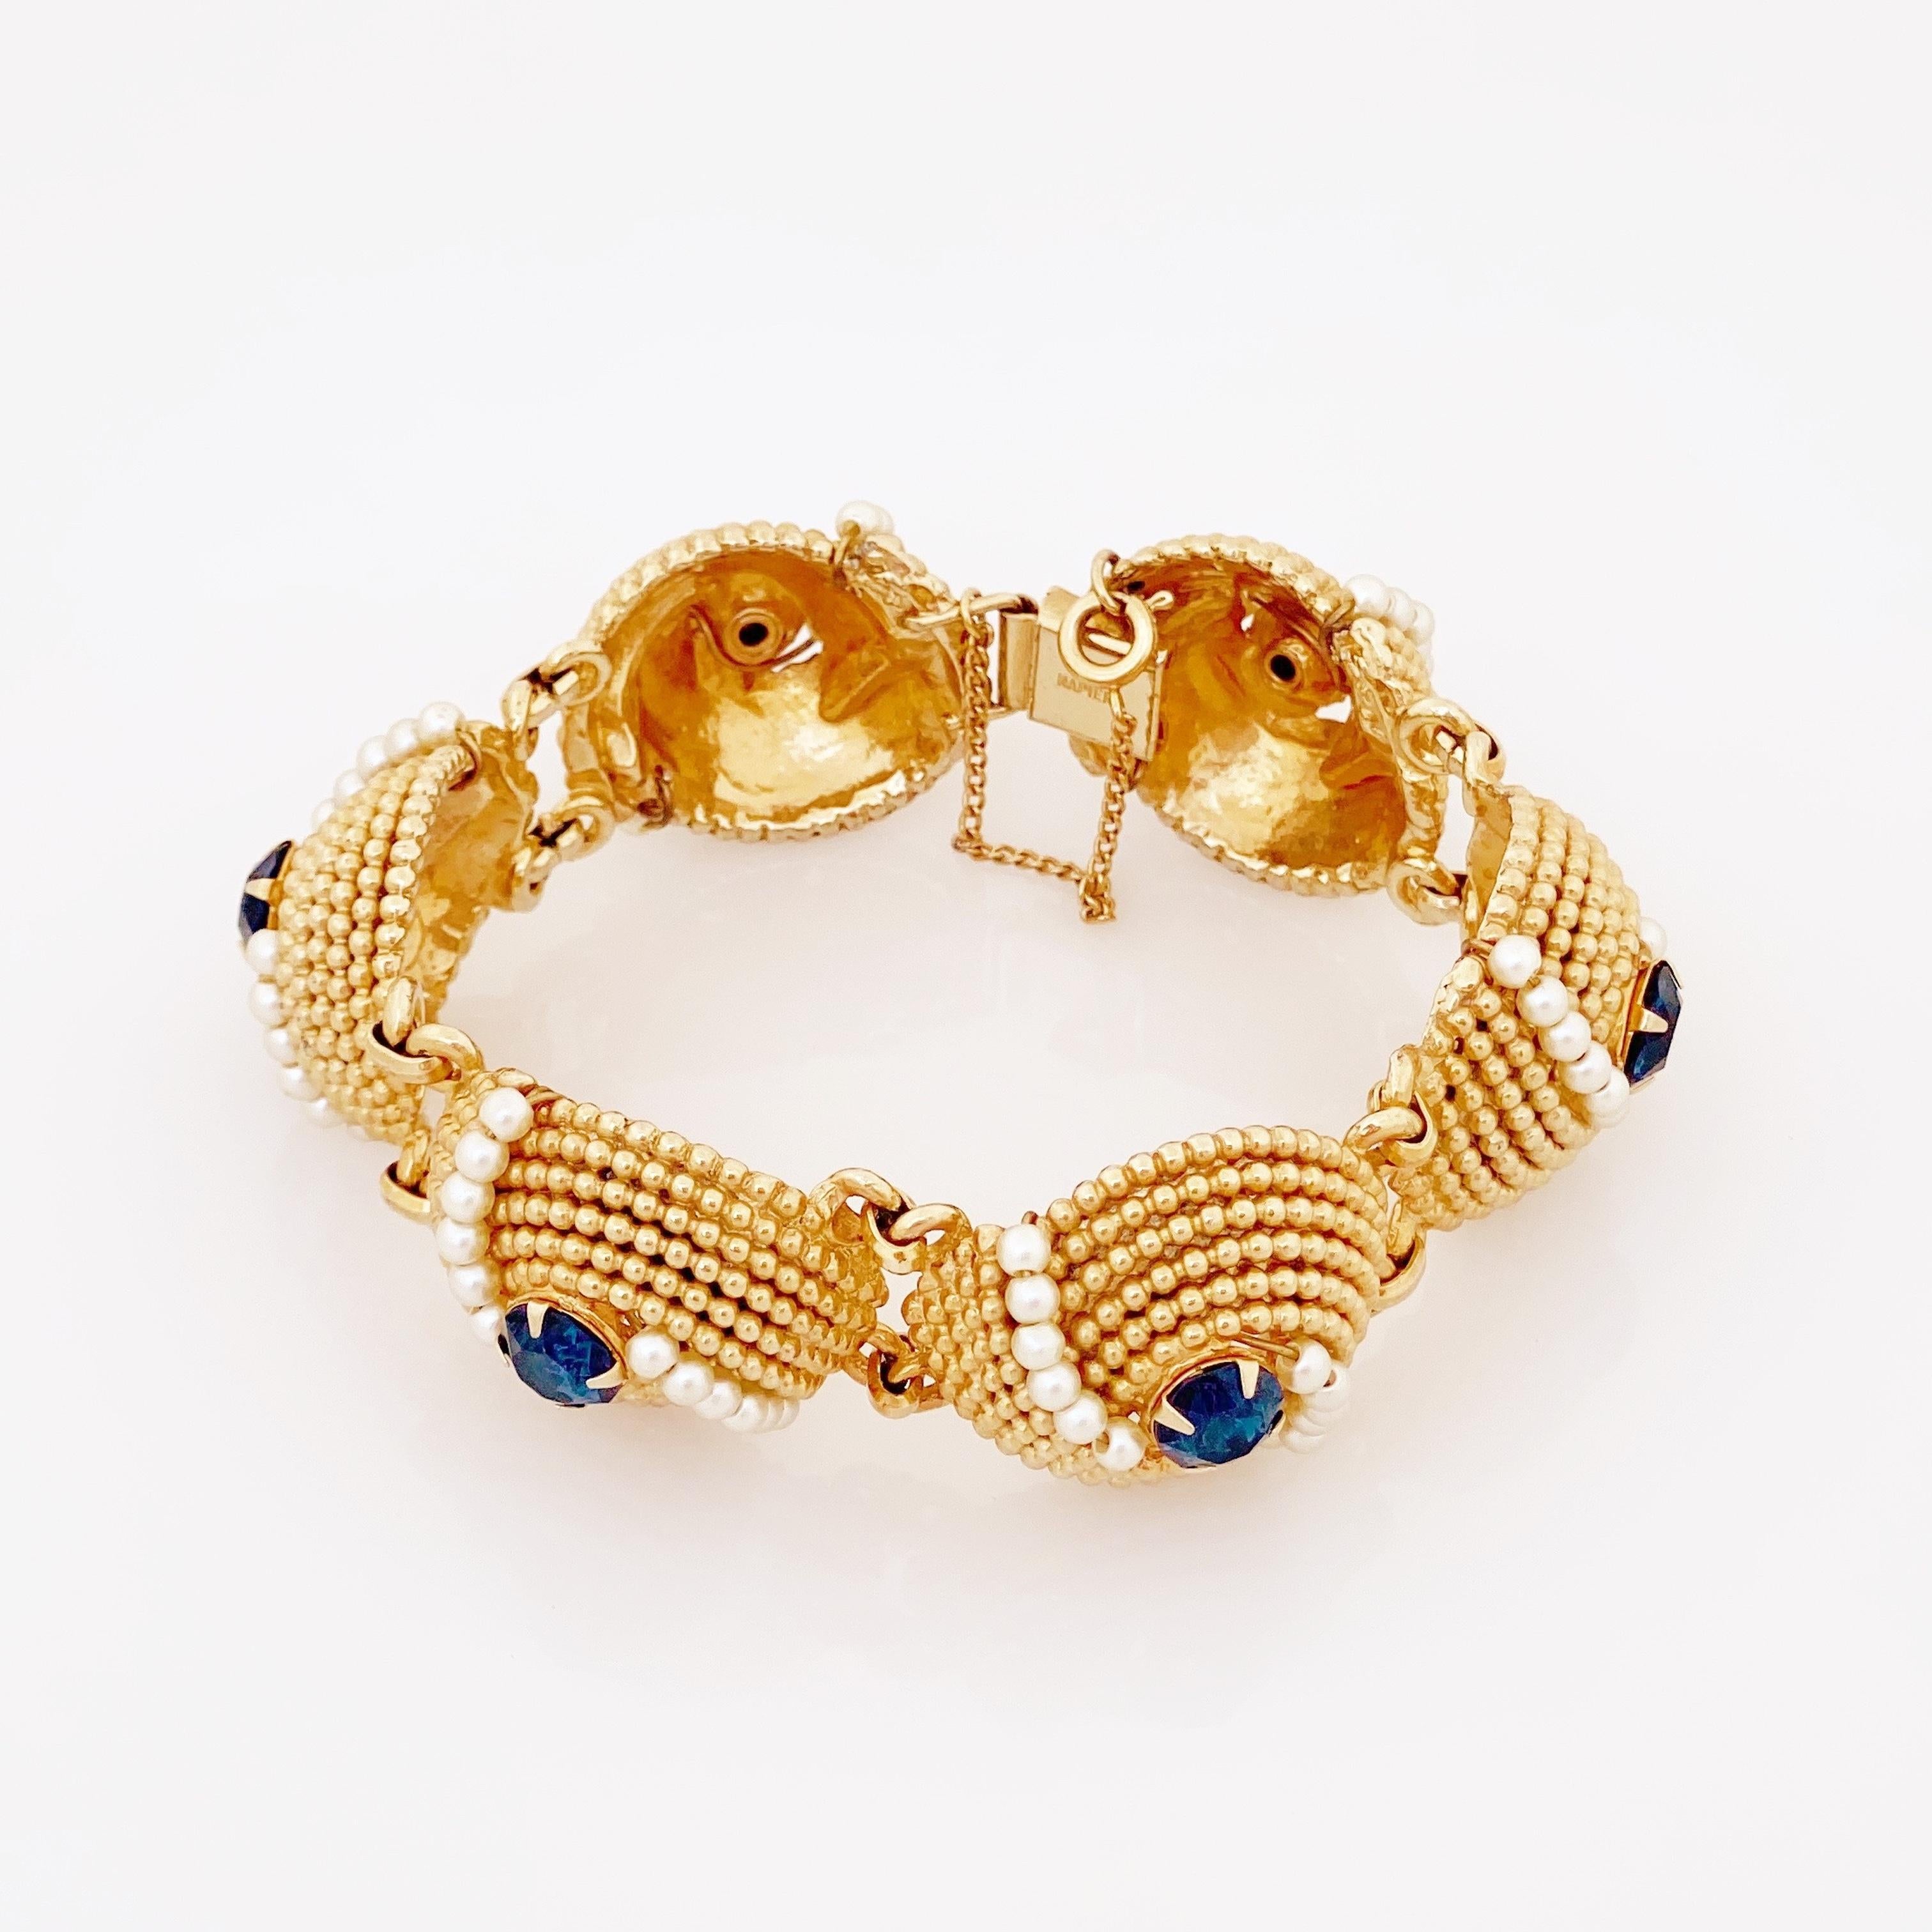 Women's Gold Dome Link Bracelet With Sapphire Crystals & Pearls By Napier, 1970s